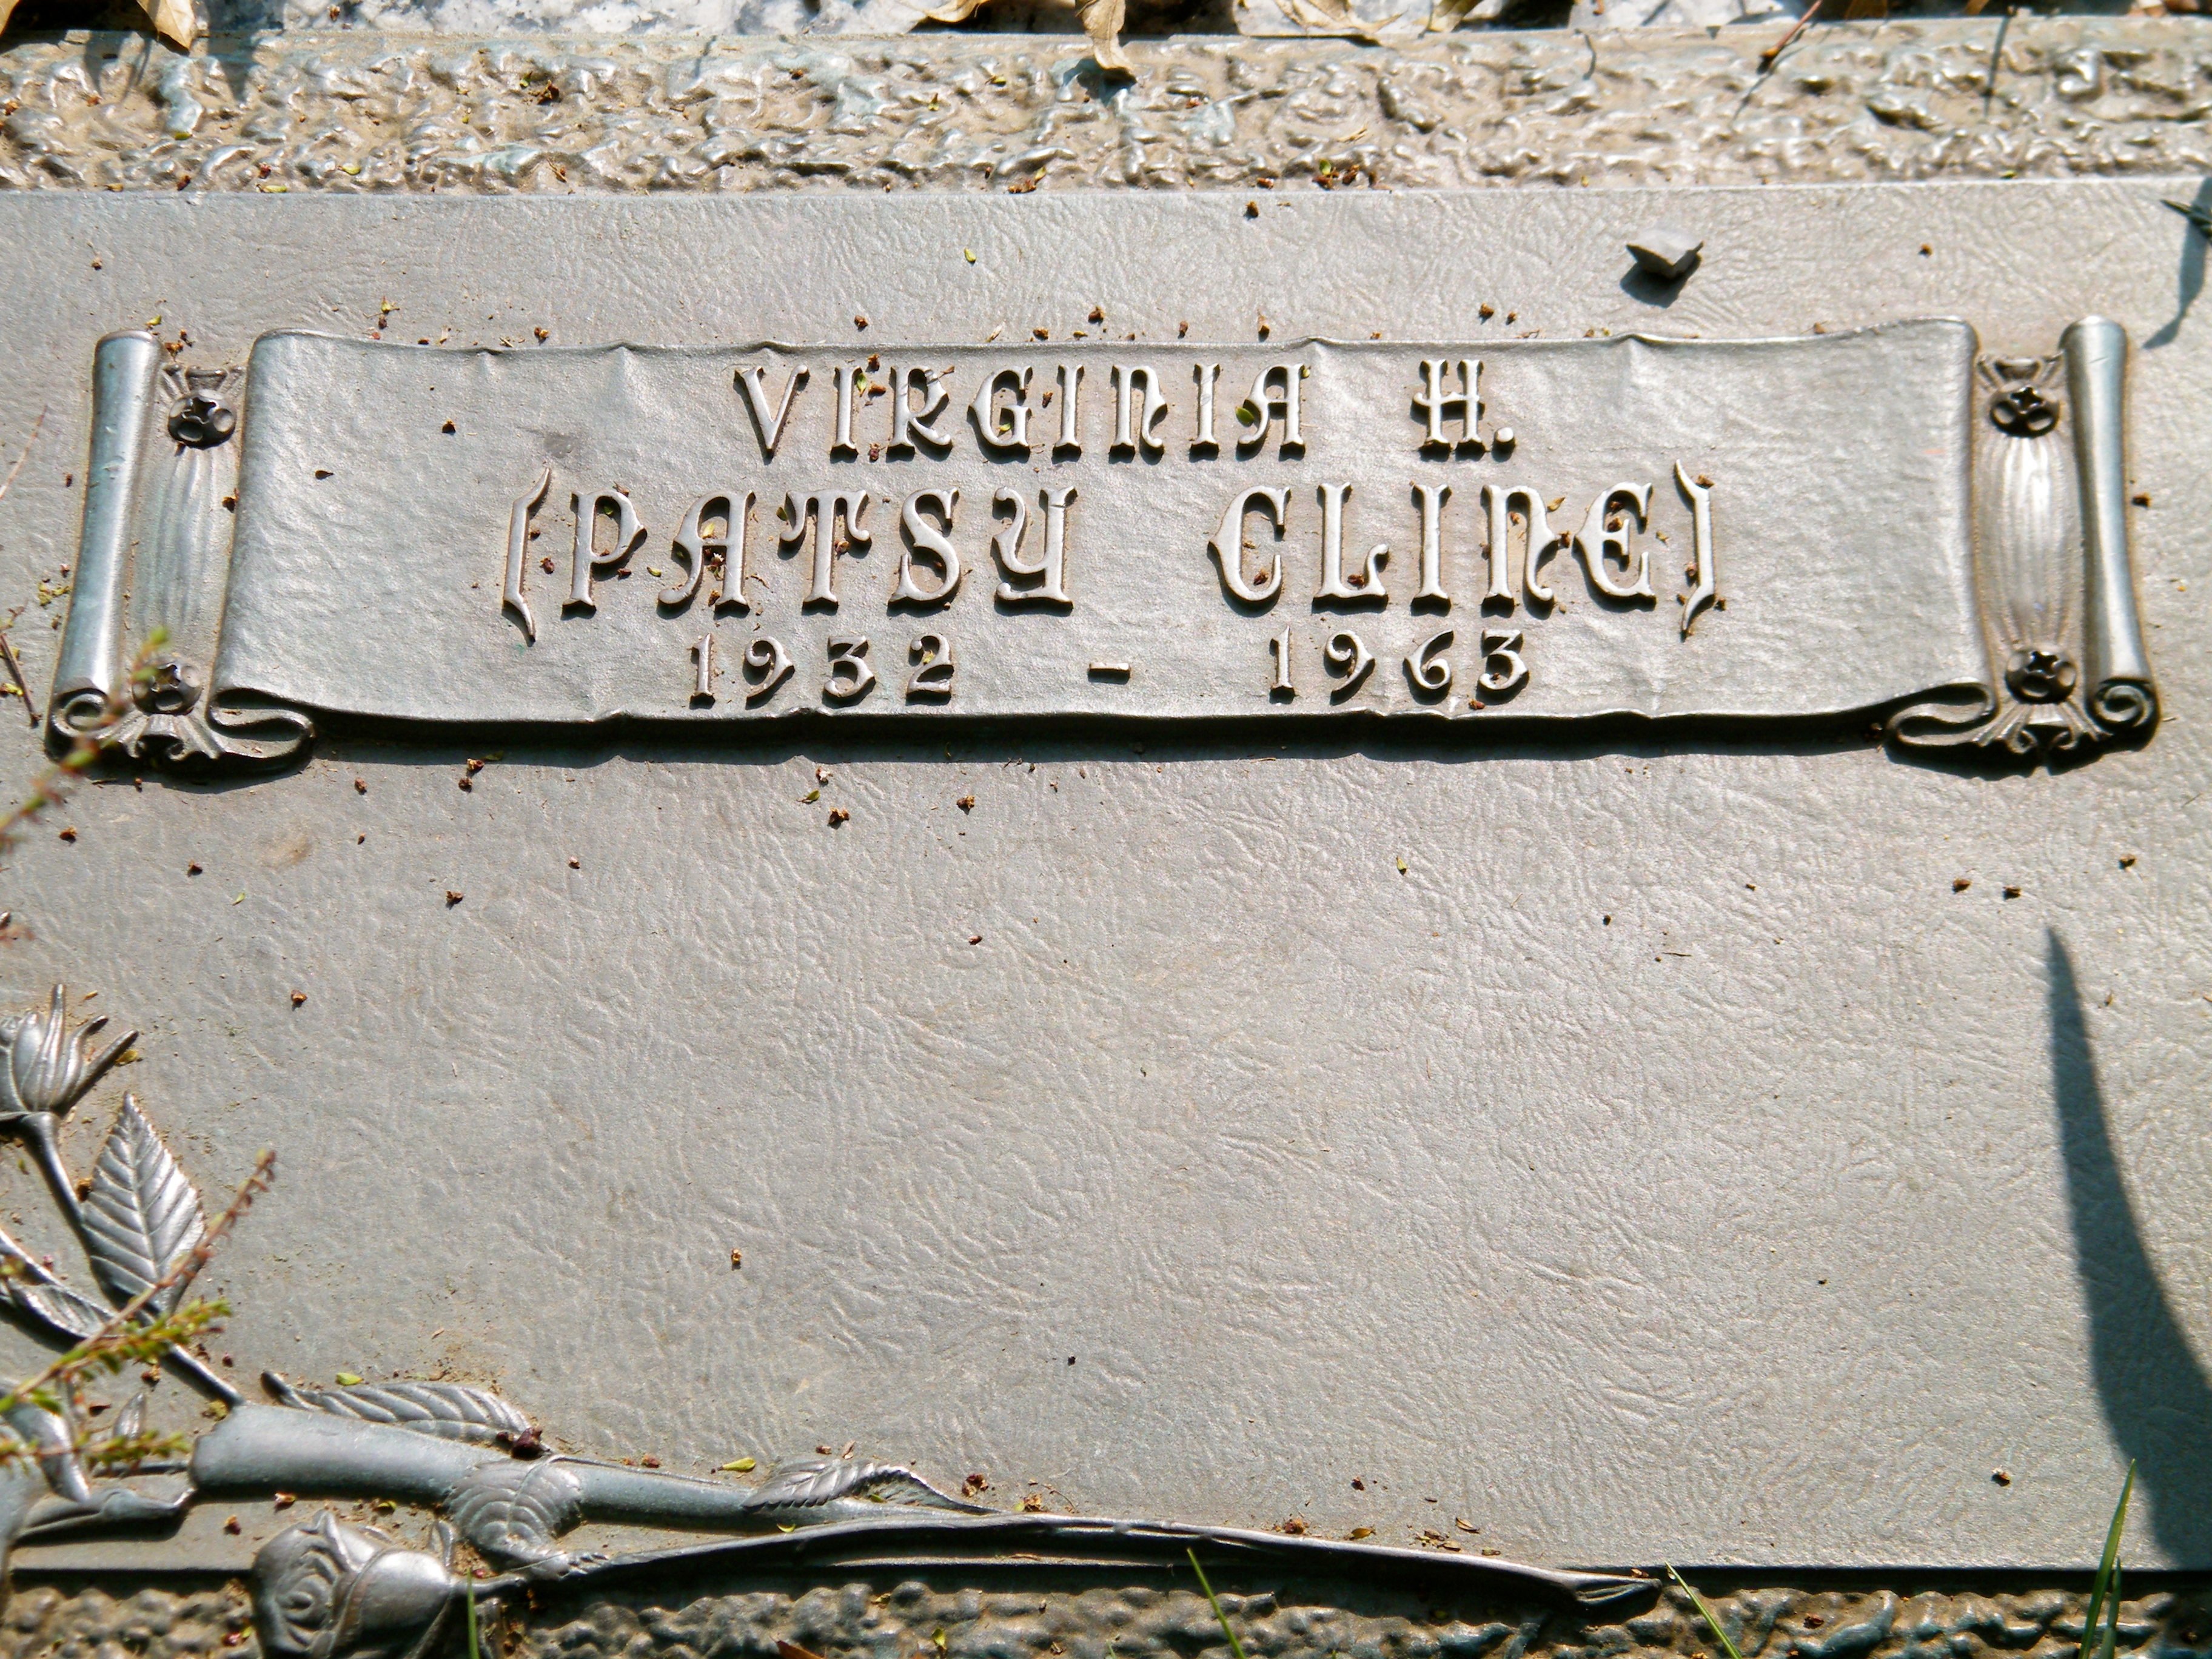 Grave of Patsy Cline - Winchester, Virginia | Source: Wikimedia Commons